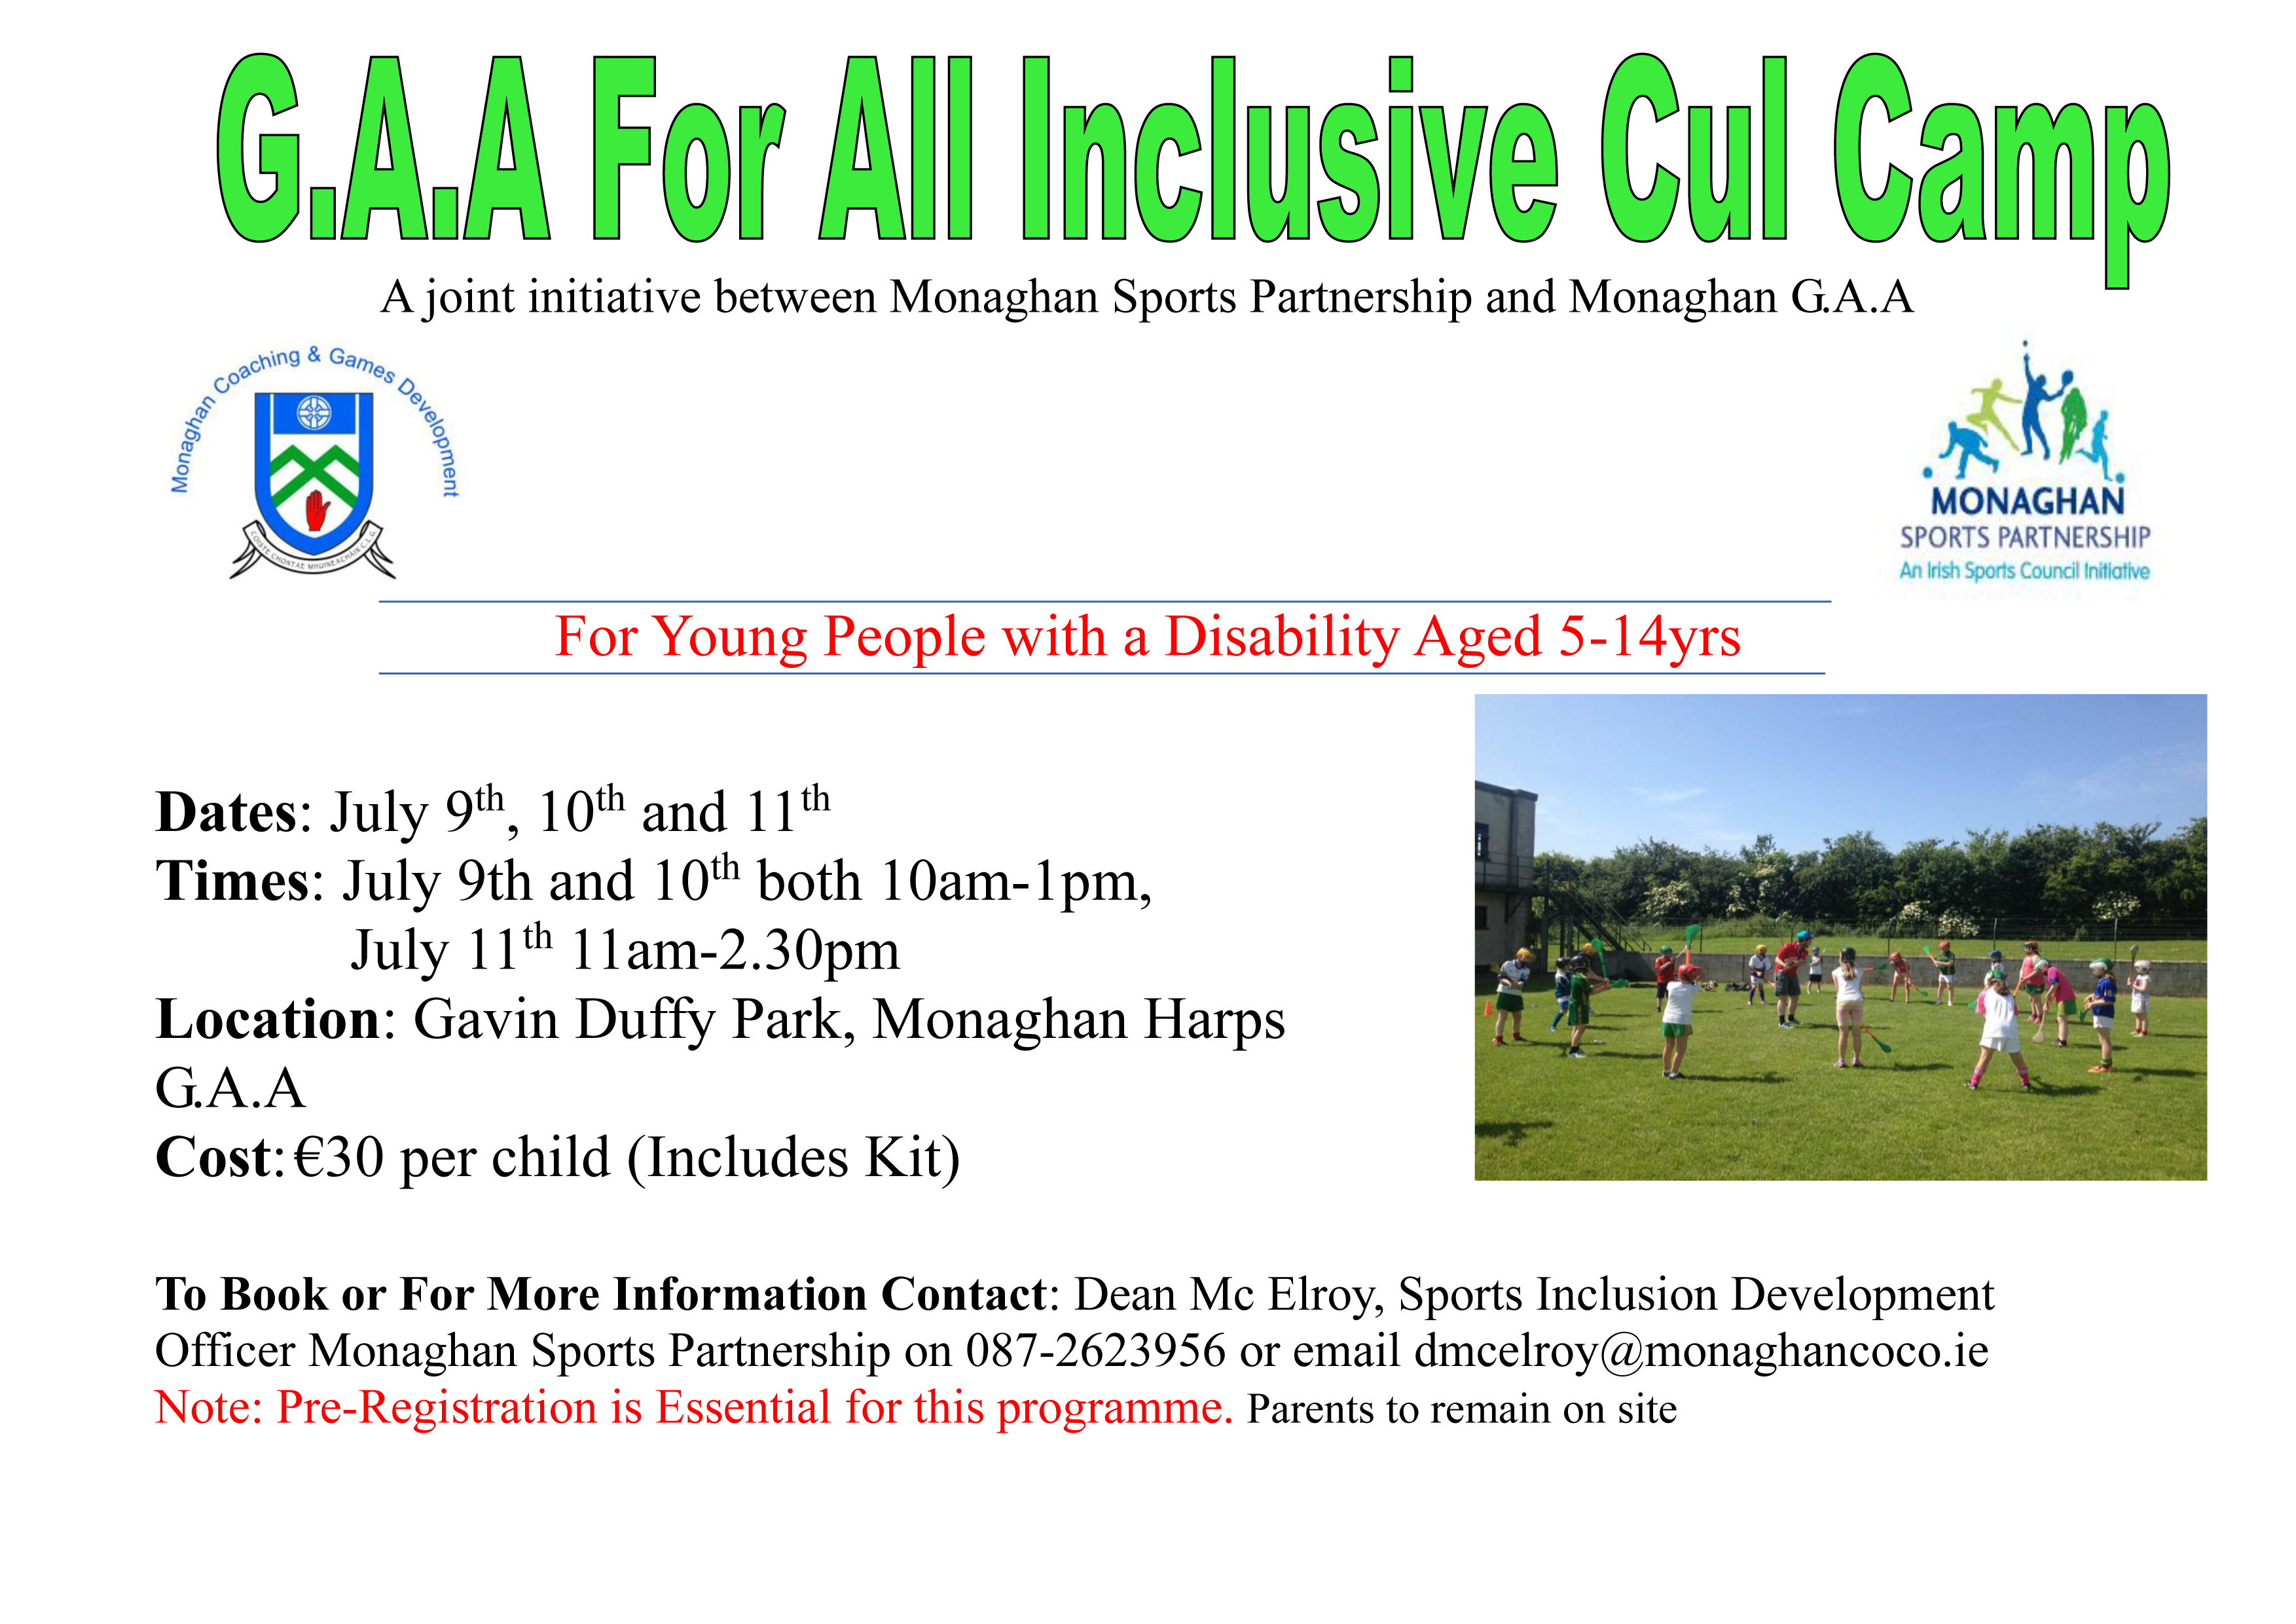 New G.A.A For All Inclusive Cul Camp in Monaghan